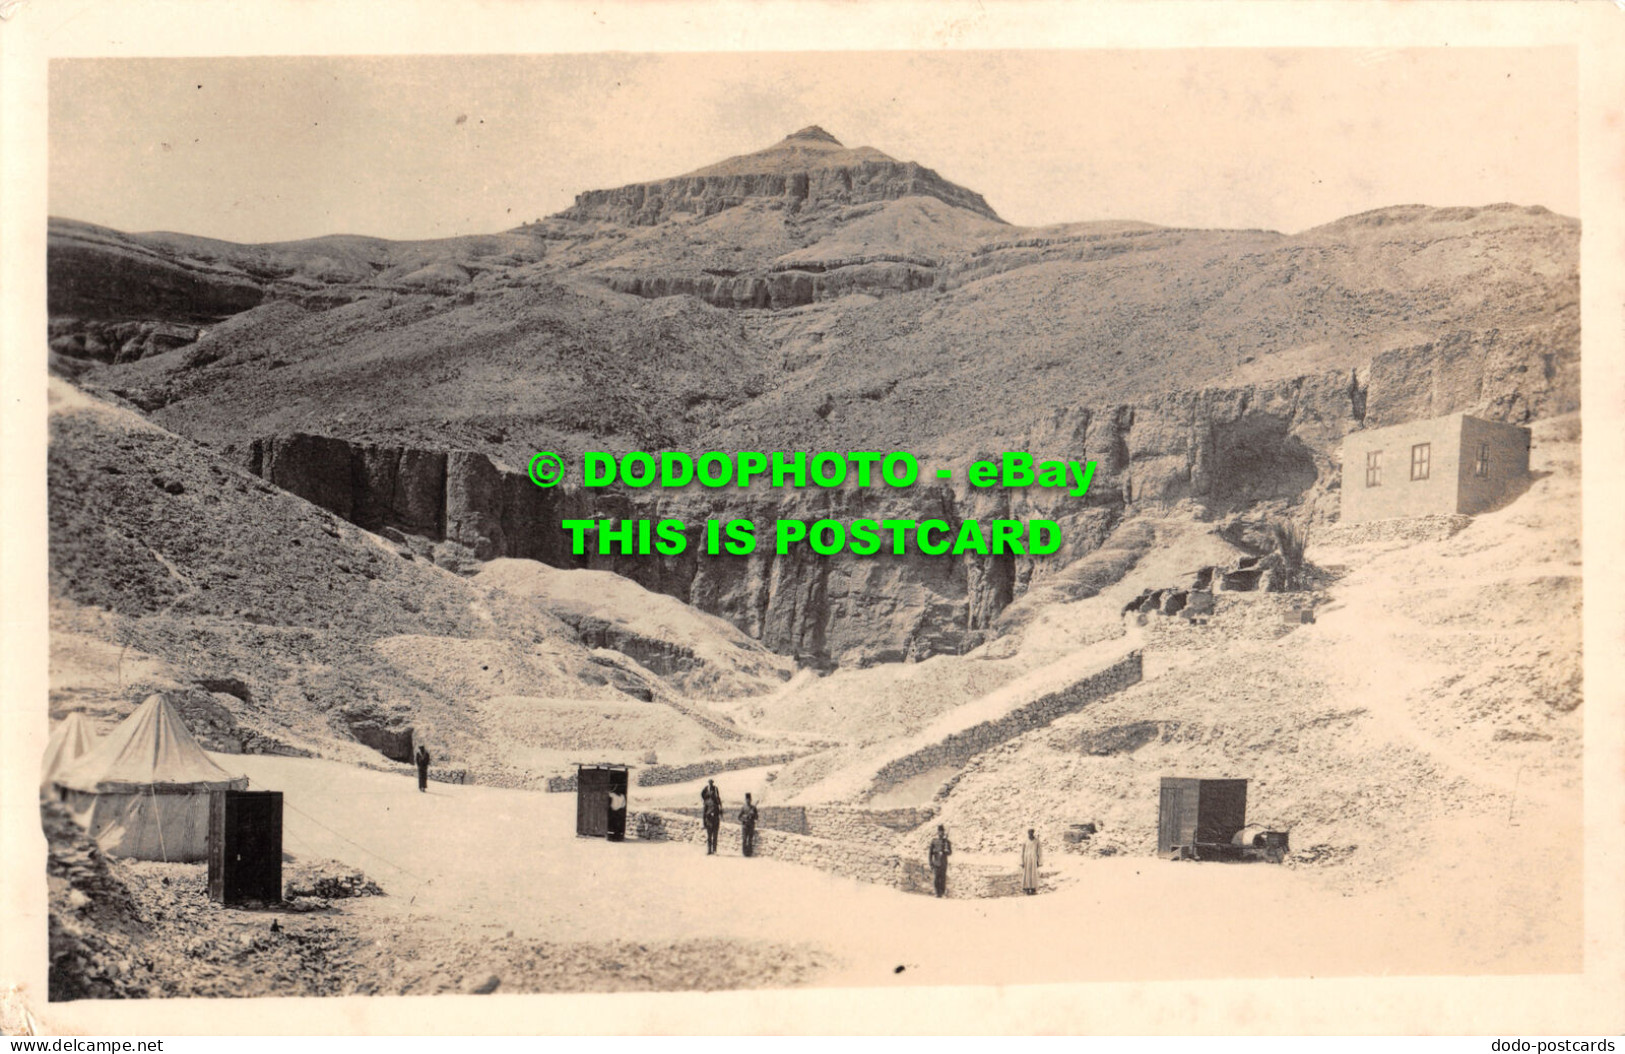 R467263 Thebes. The Entrance Of Tut Ankh Amen. Tomb. And Valley Of The King. Kod - Welt